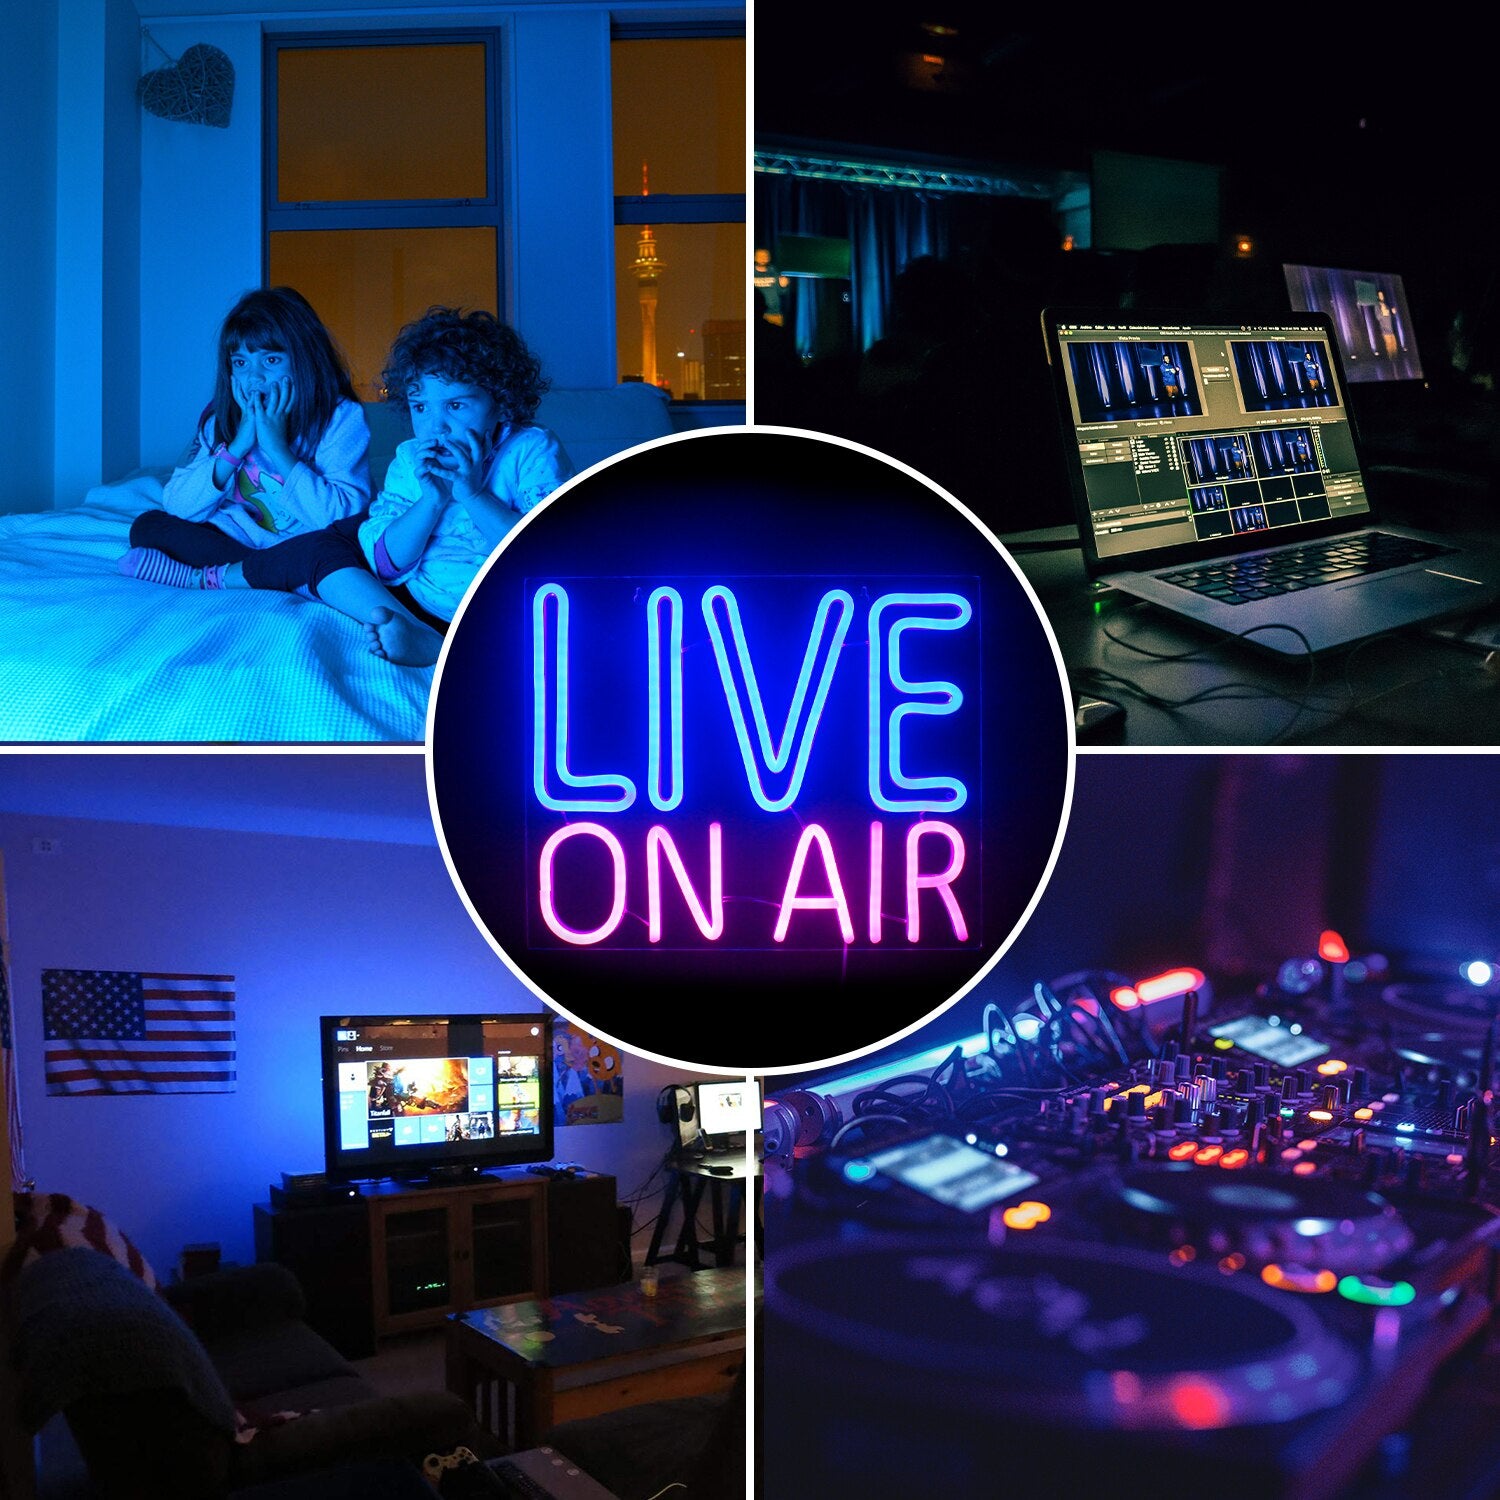 LIVE ON AIR Neon LED Sign